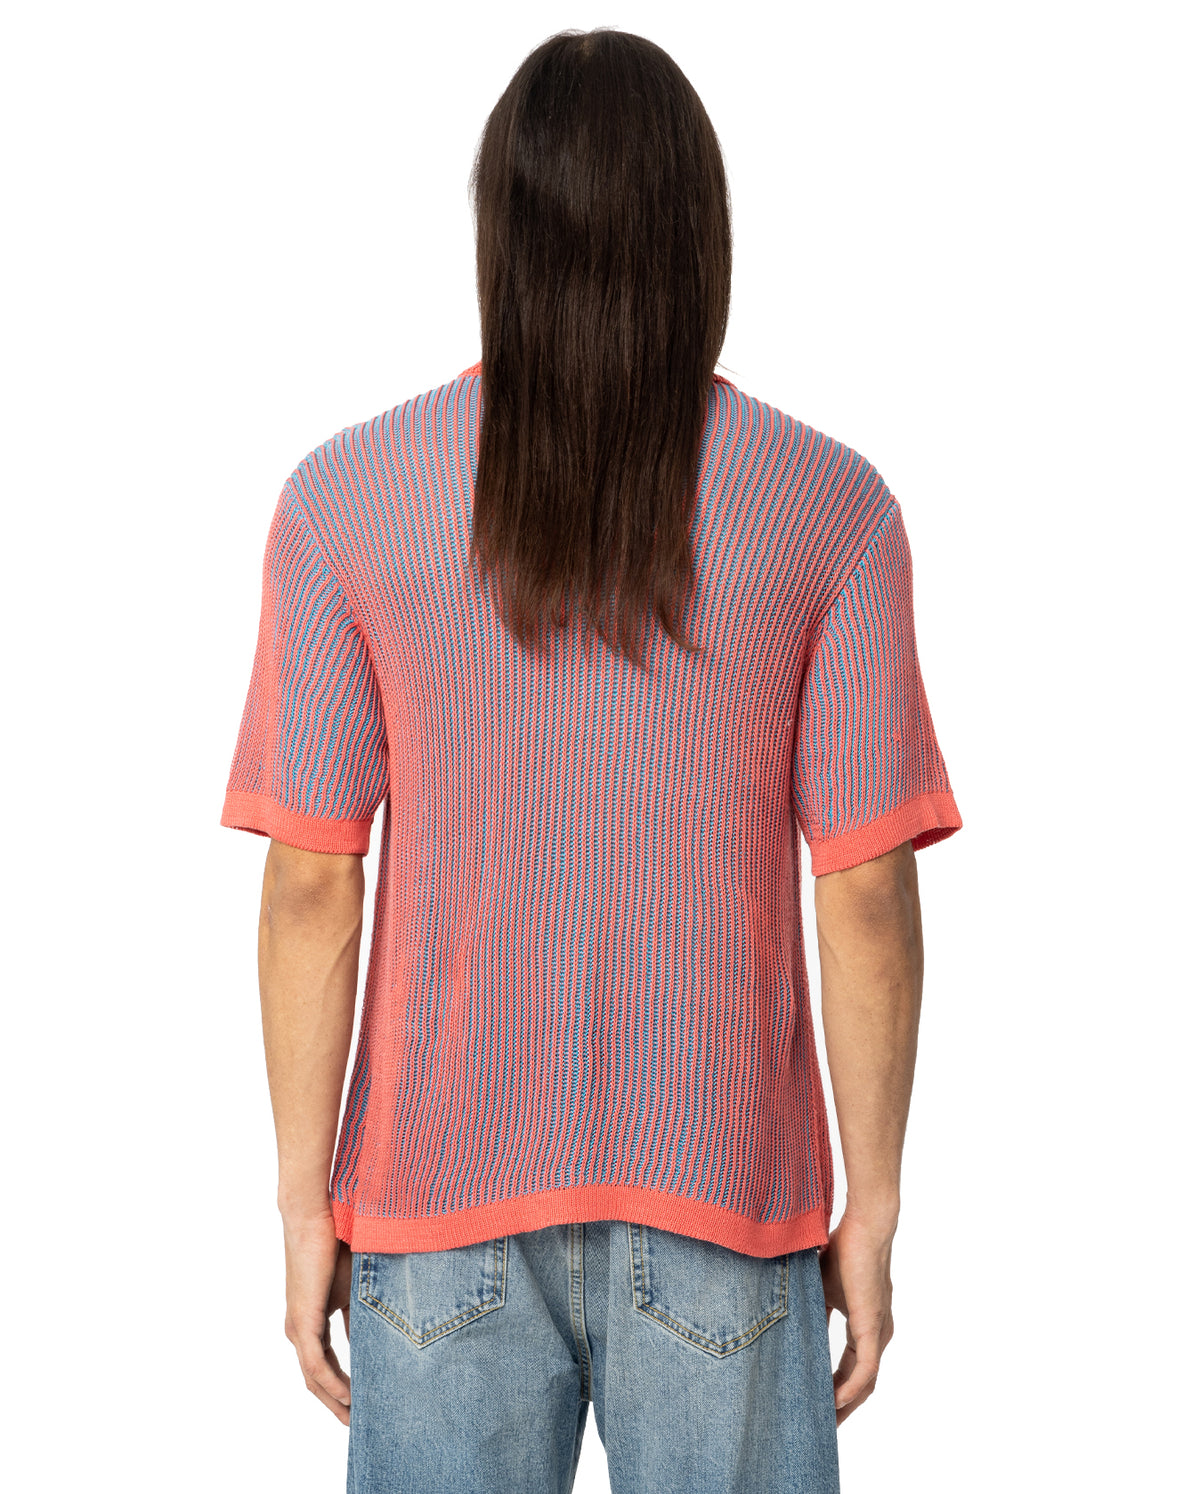 Plated Rib Knit Button Up Short Sleeve Shirt - Pink